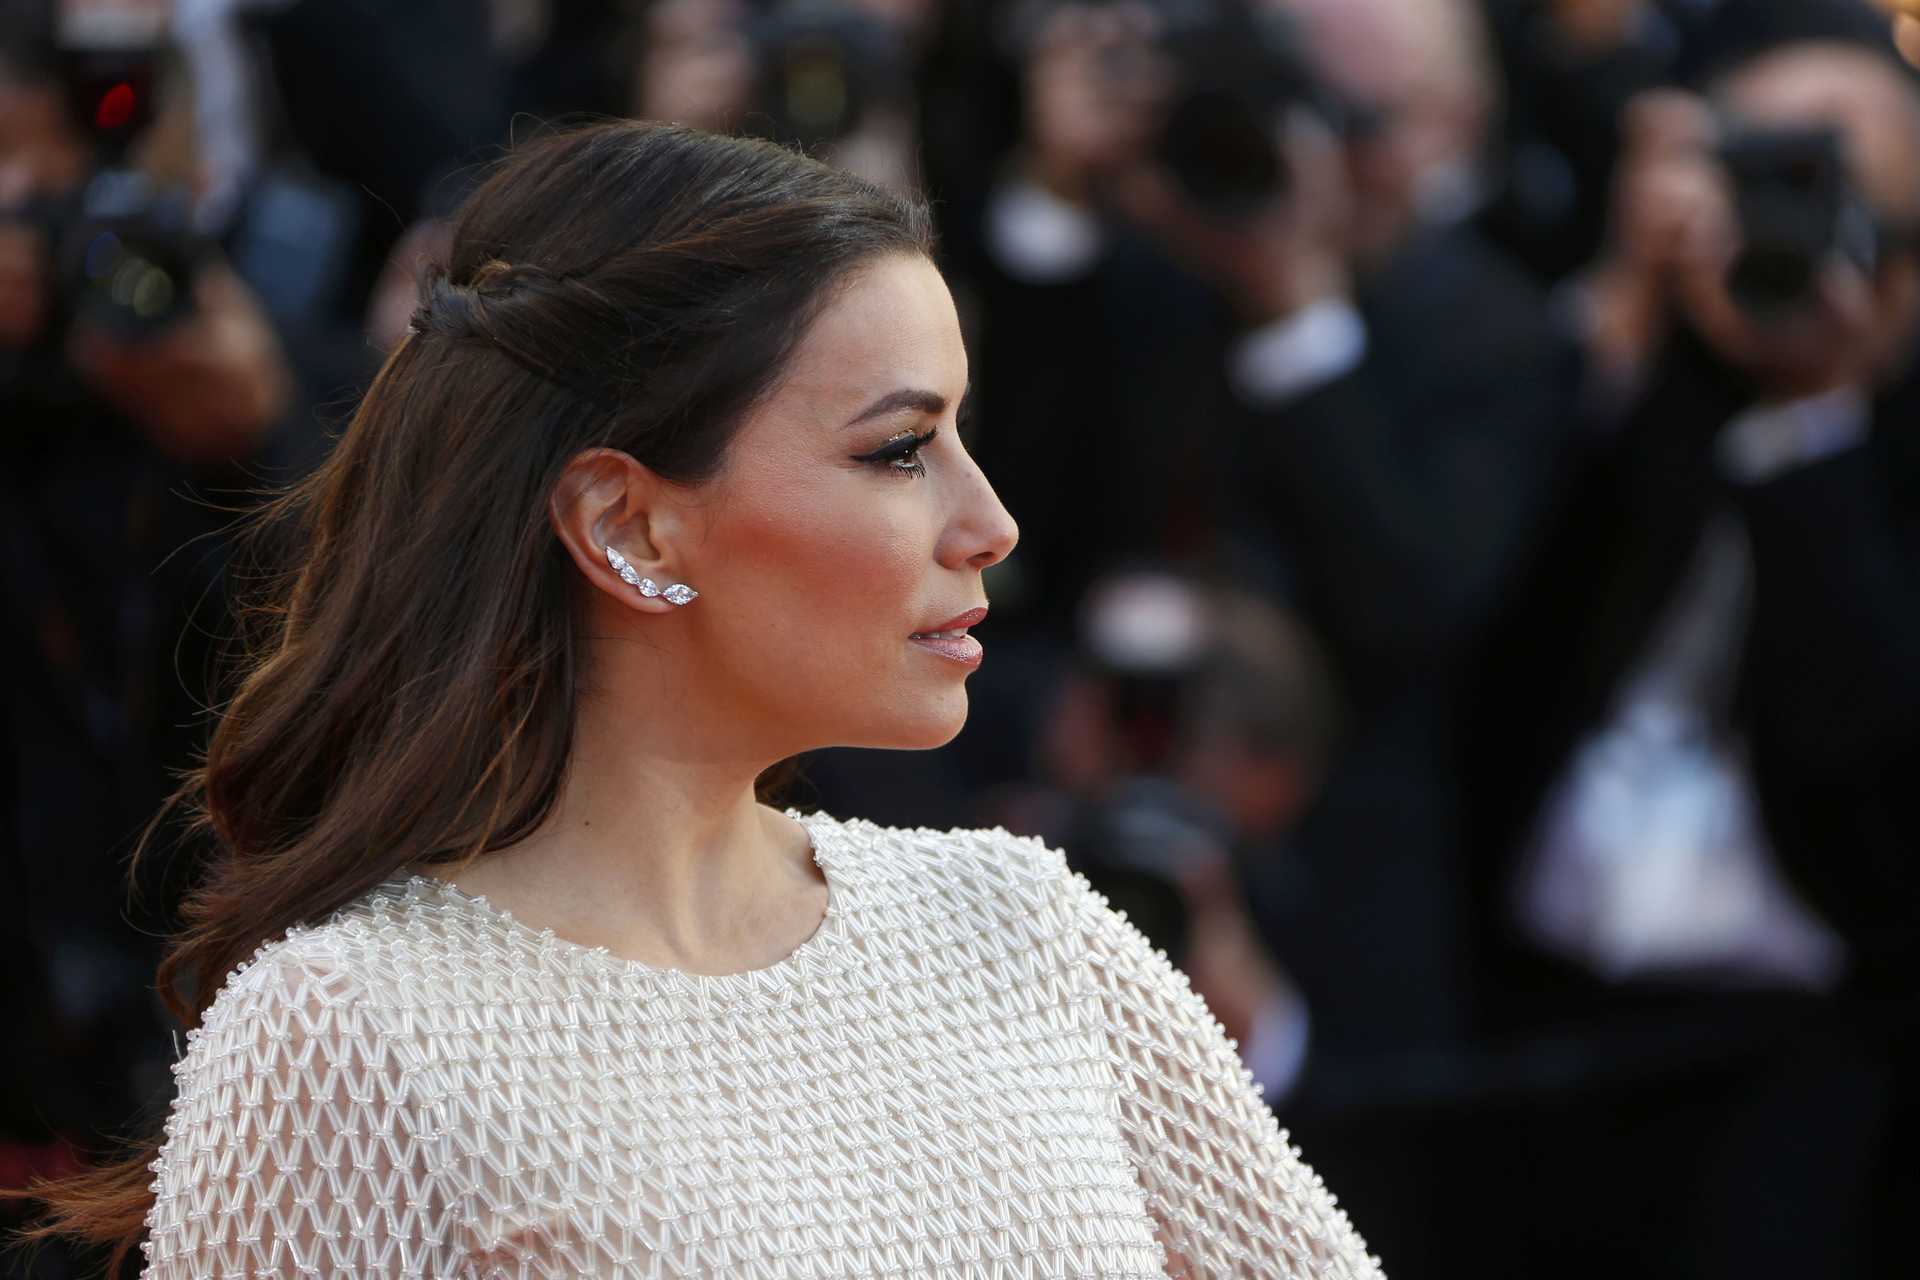 Actress Eva Longoria poses on the red carpet as she arrives for the opening ceremony and the screening of the film “Cafe Society” out of competition during the 69th Cannes Film Festival in Cannes